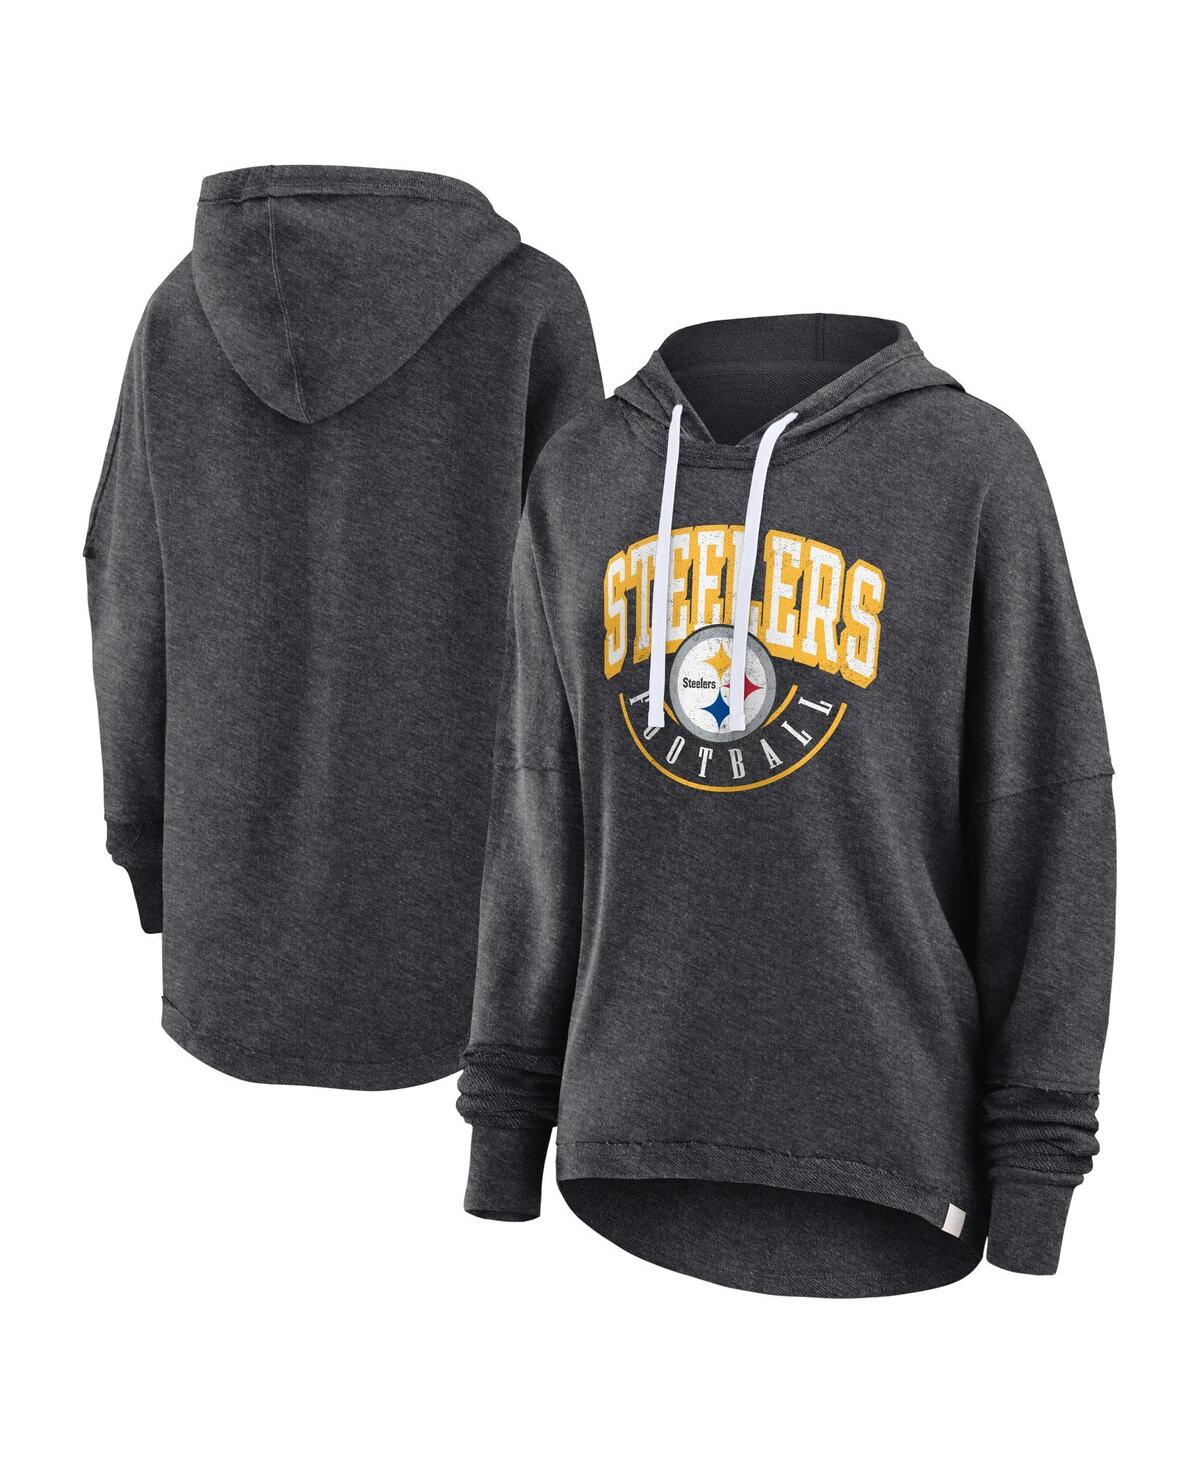 Women's Fanatics Charcoal Distressed Pittsburgh Steelers Lightewight Modest Crop Lounge Helmet Arch Pullover Hoodie - Charcoal